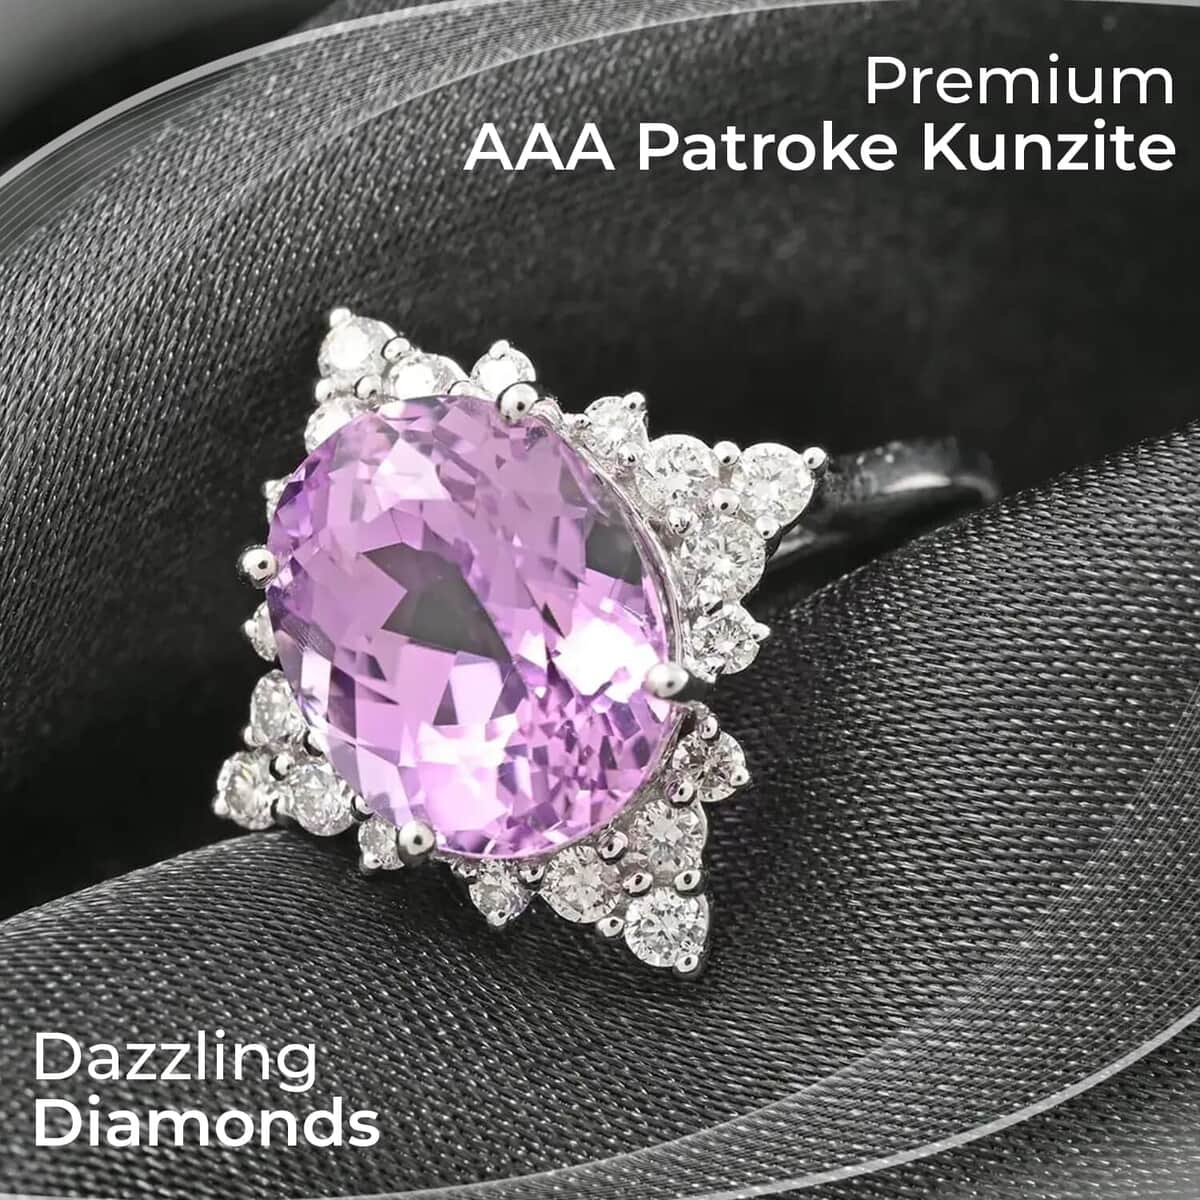 Rhapsody Certified & Appraised AAA Patroke Kunzite Ring,  E-F VS Diamond Accent Ring, 950 Platinum Ring, Pink Wedding Ring For Her 6.15 Grams 5.25 ctw image number 1